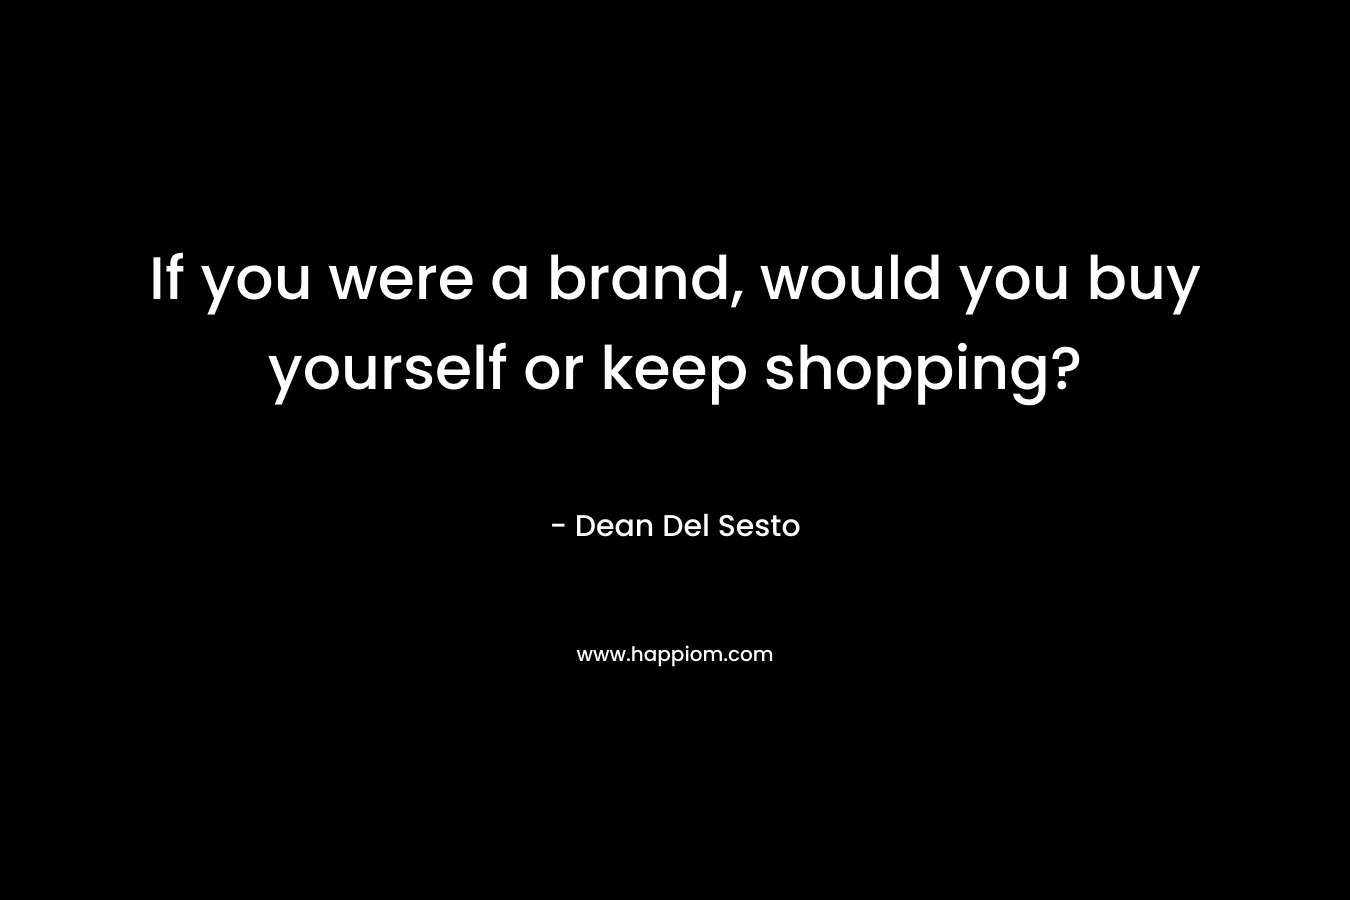 If you were a brand, would you buy yourself or keep shopping? – Dean Del Sesto